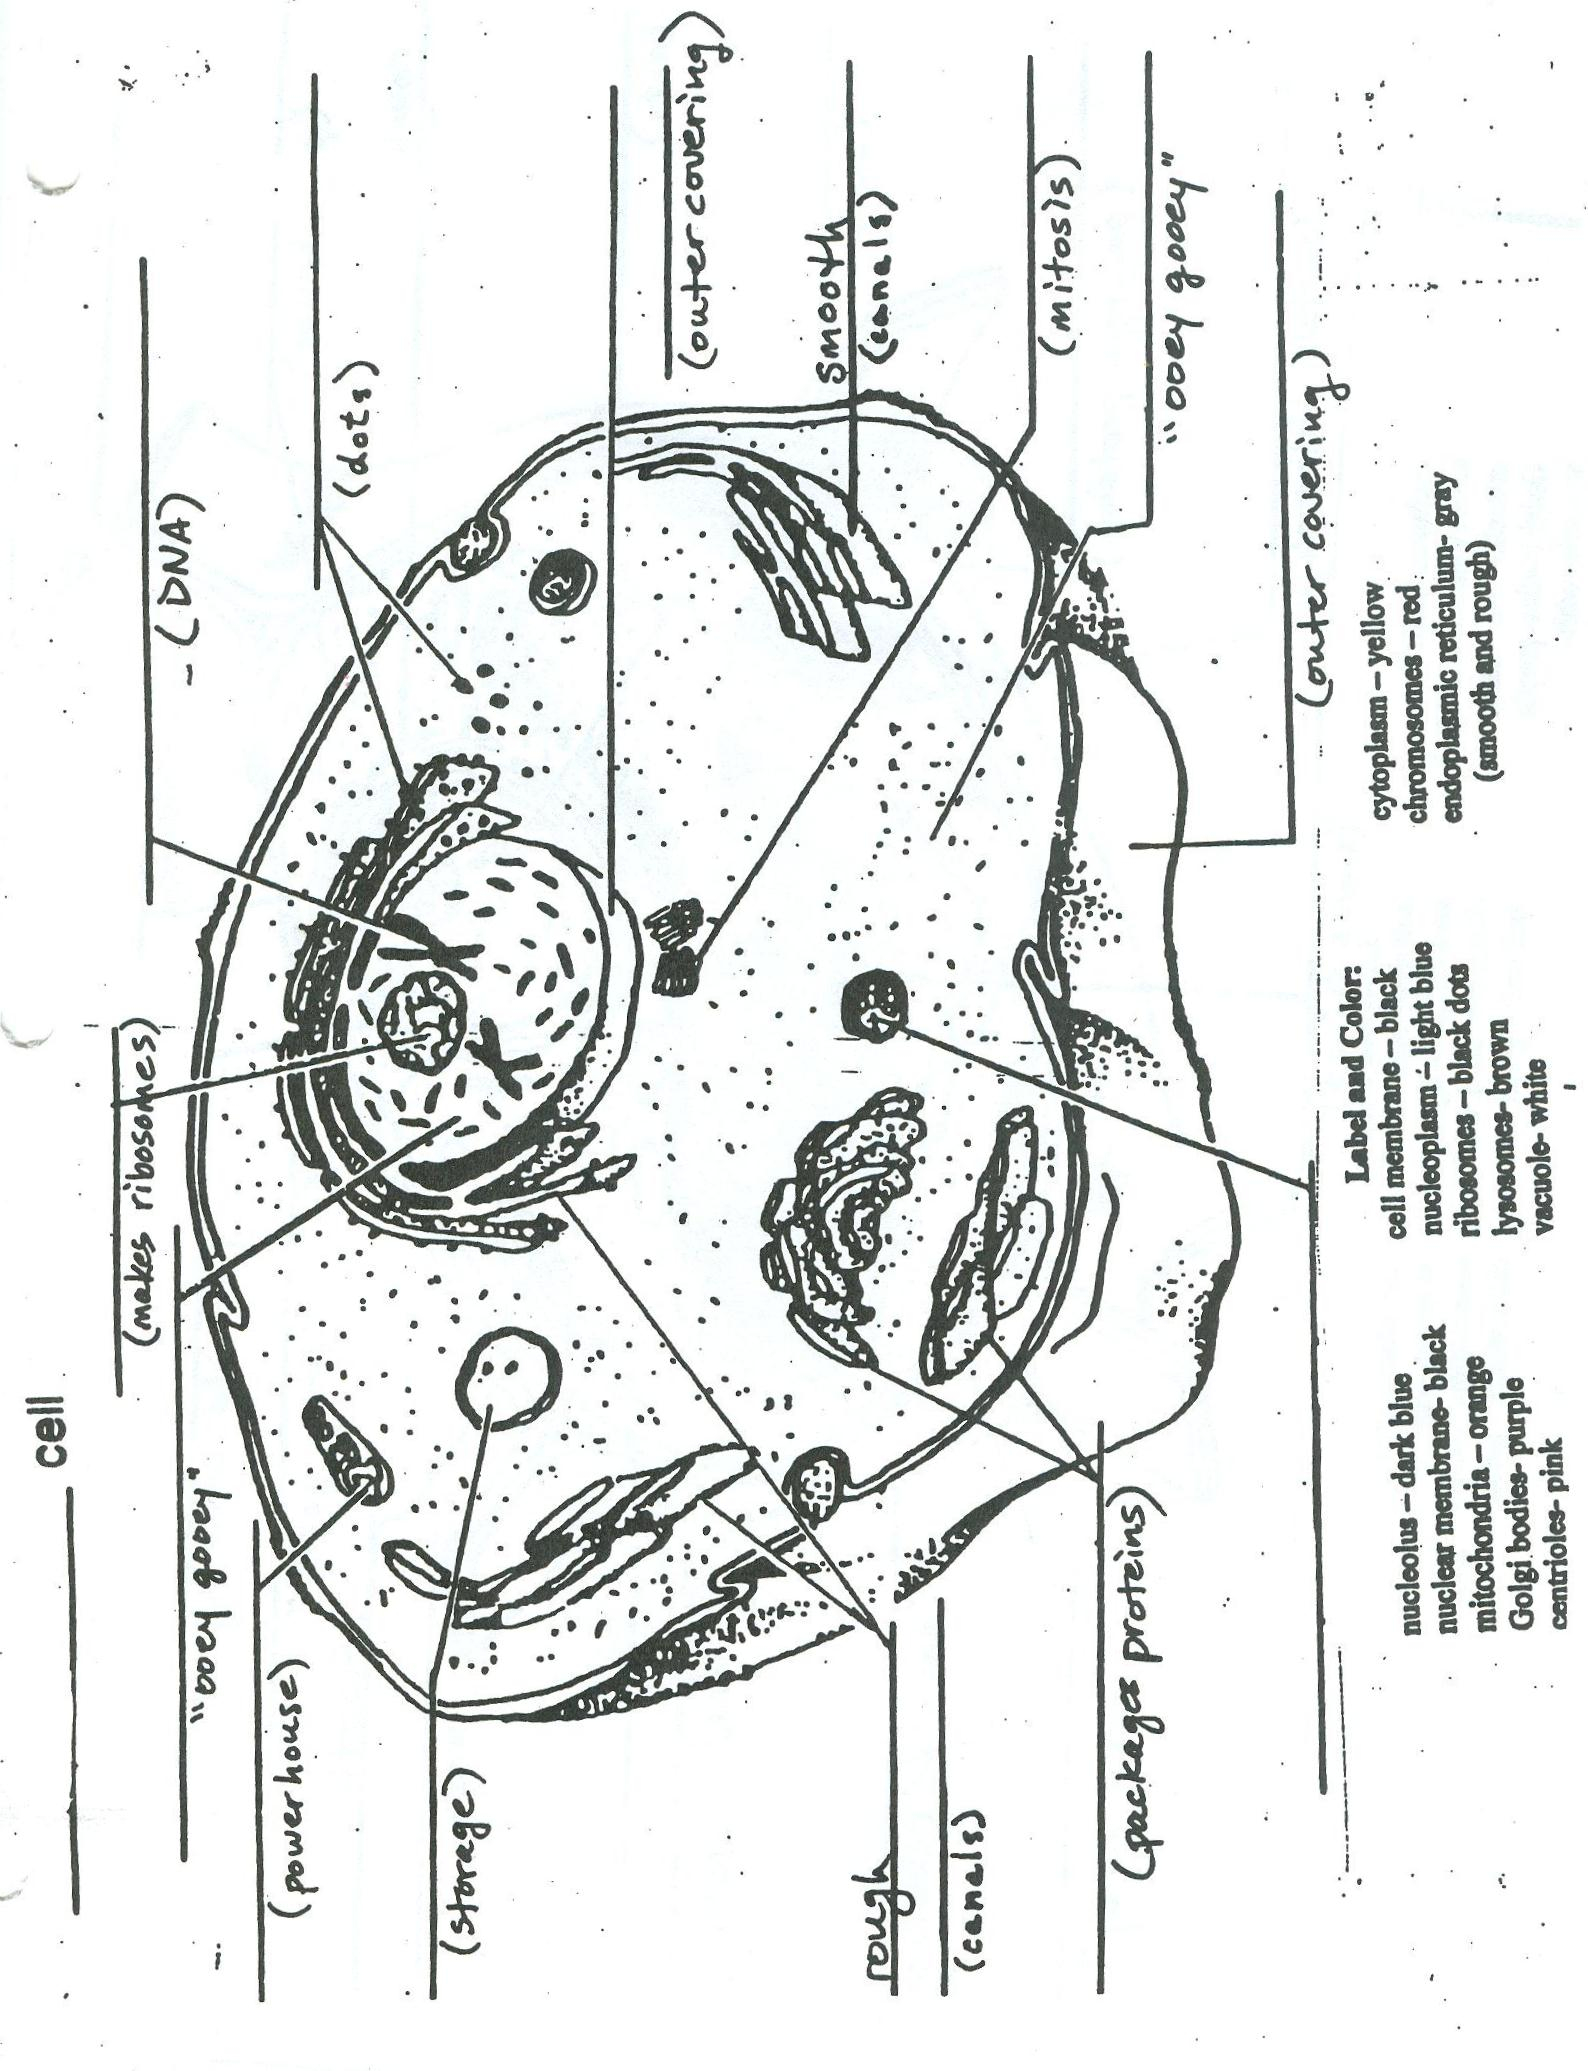 Plant And Animal Cell Diagram Cell Diagrams For Animal And Plant Ms Crawley